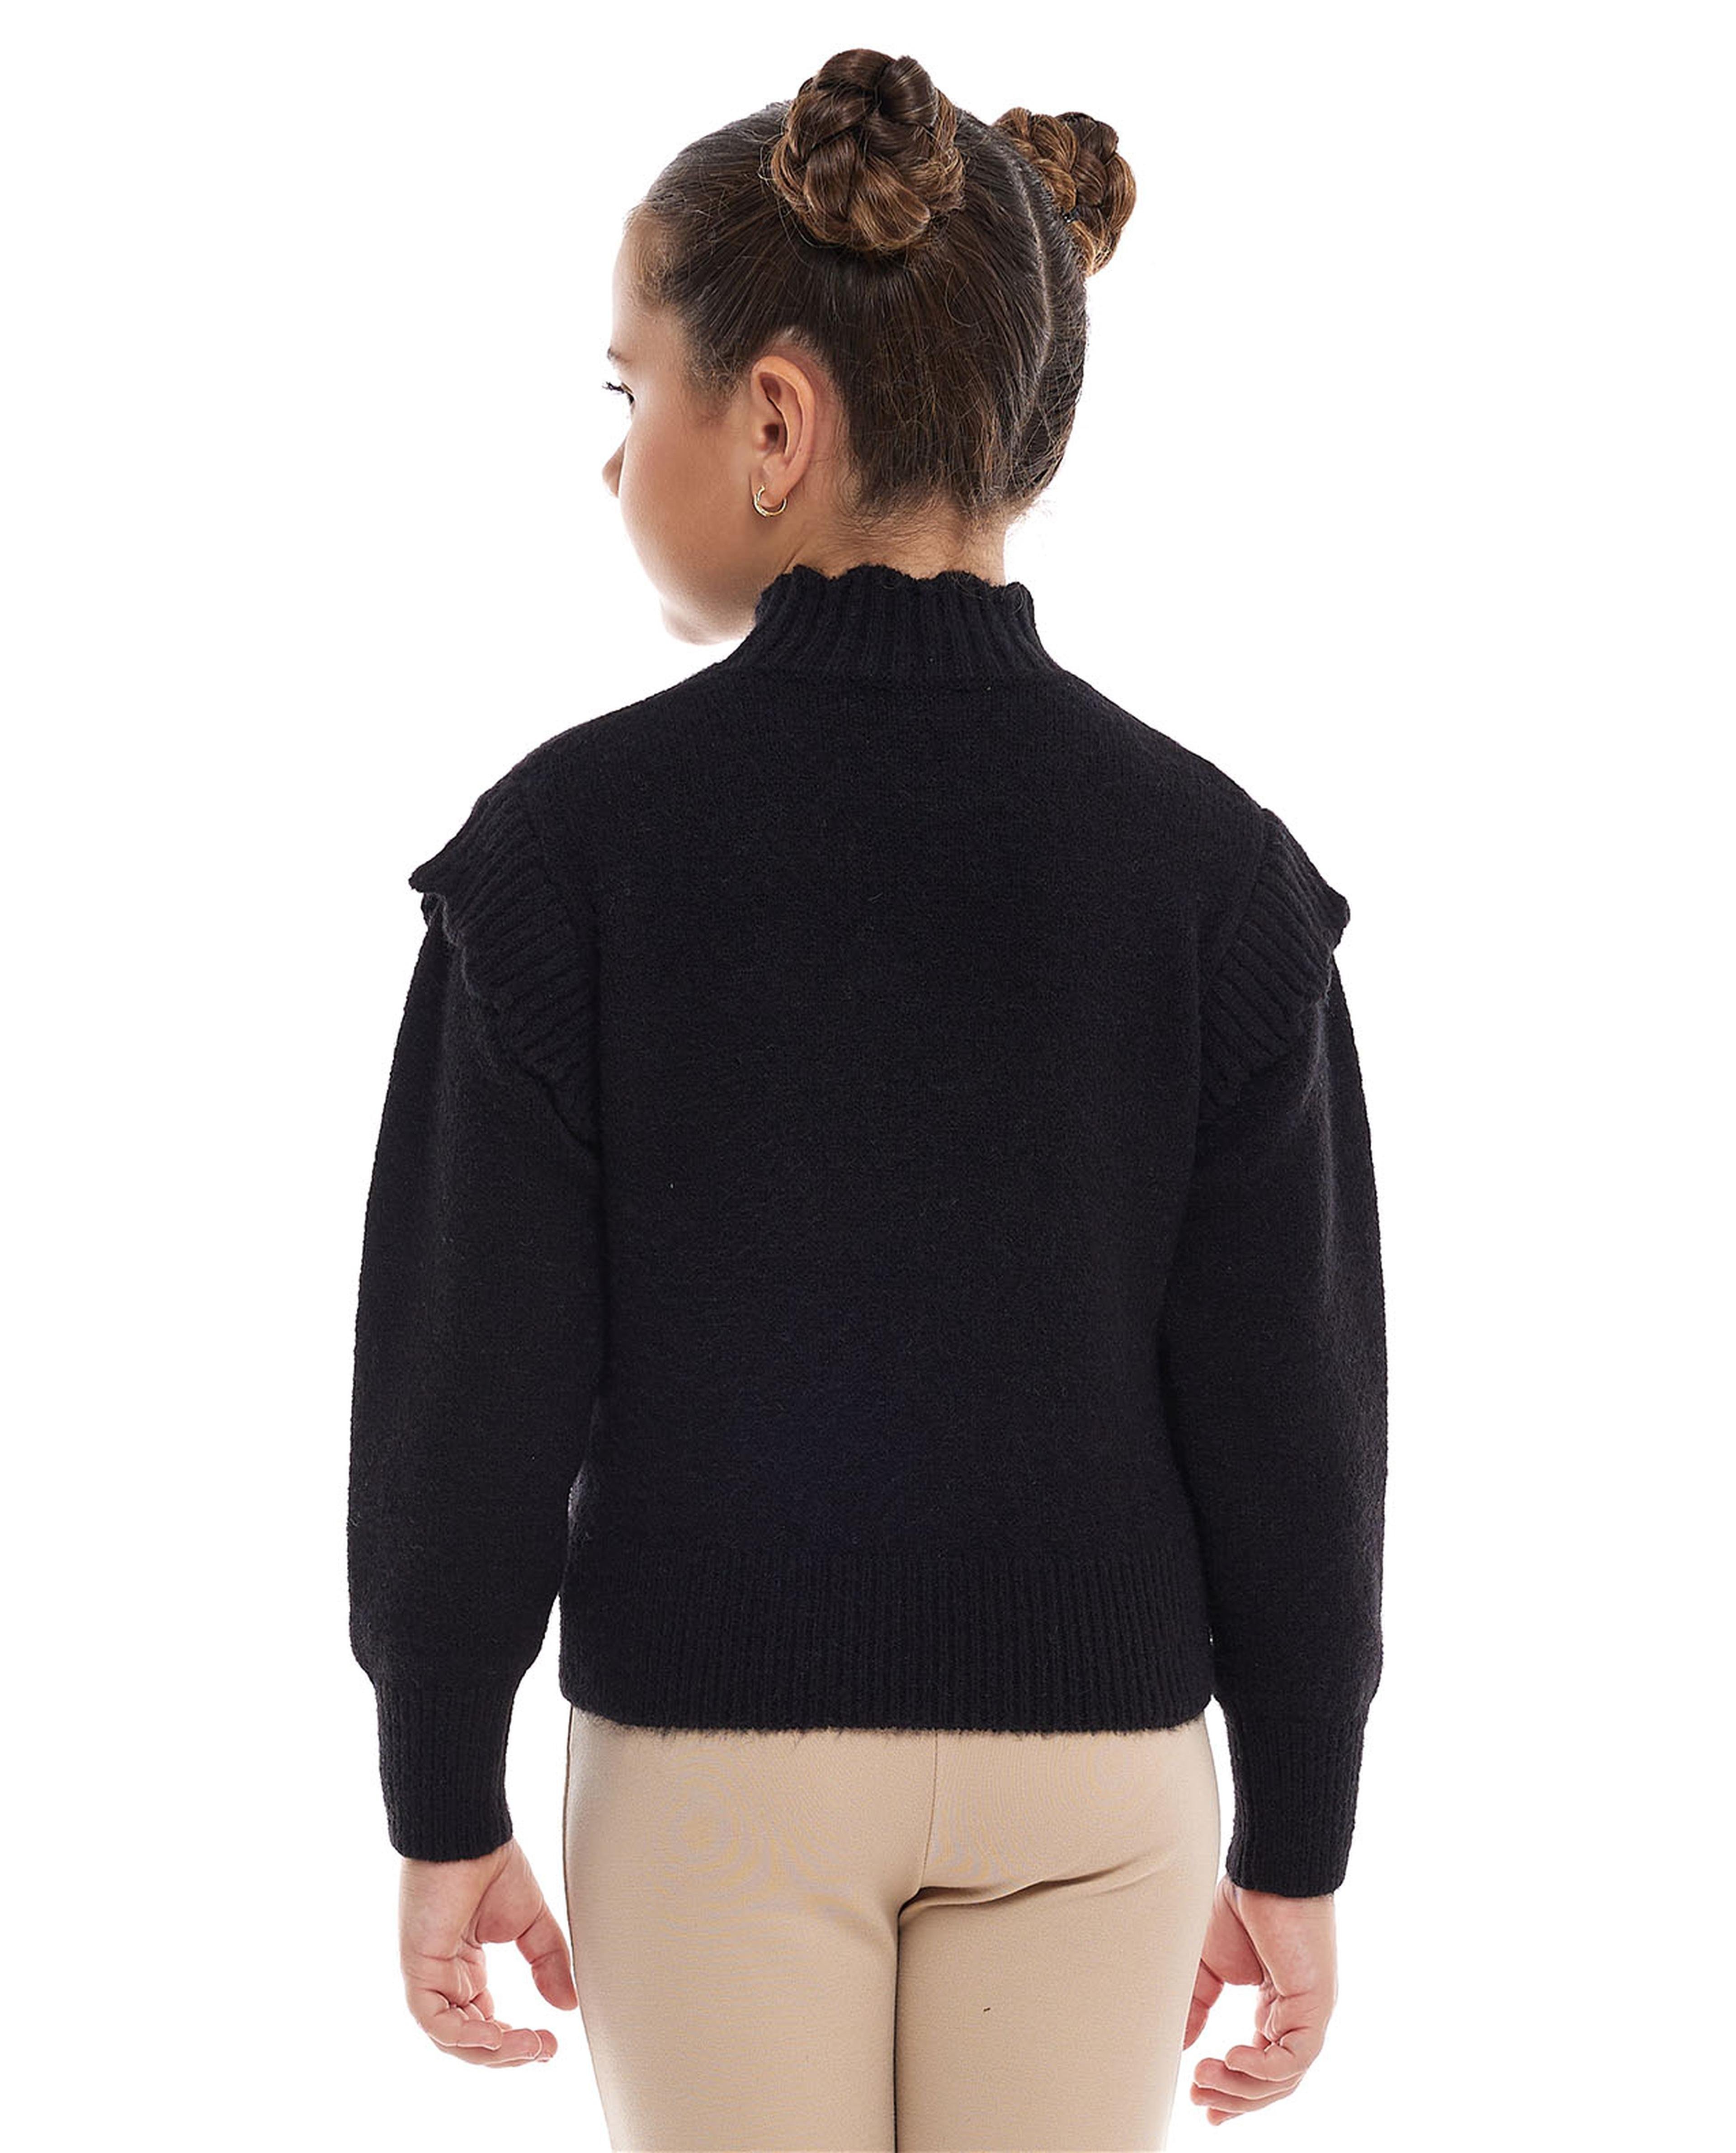 Pearl Detail Sweater with High Neck and Long Sleeves